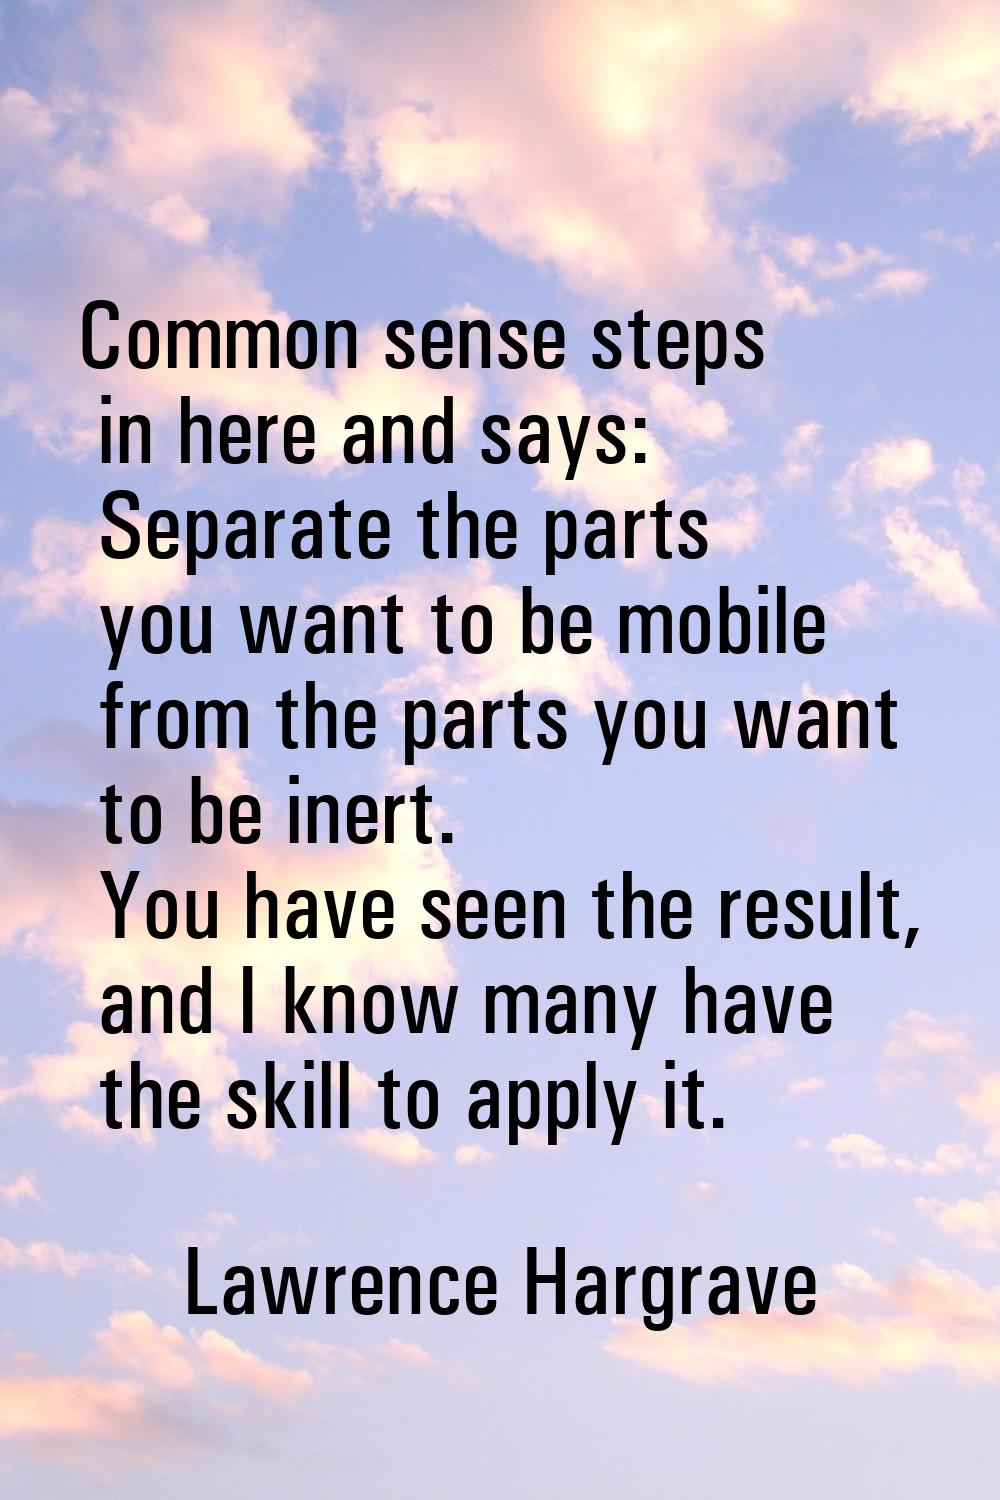 Common sense steps in here and says: Separate the parts you want to be mobile from the parts you wa